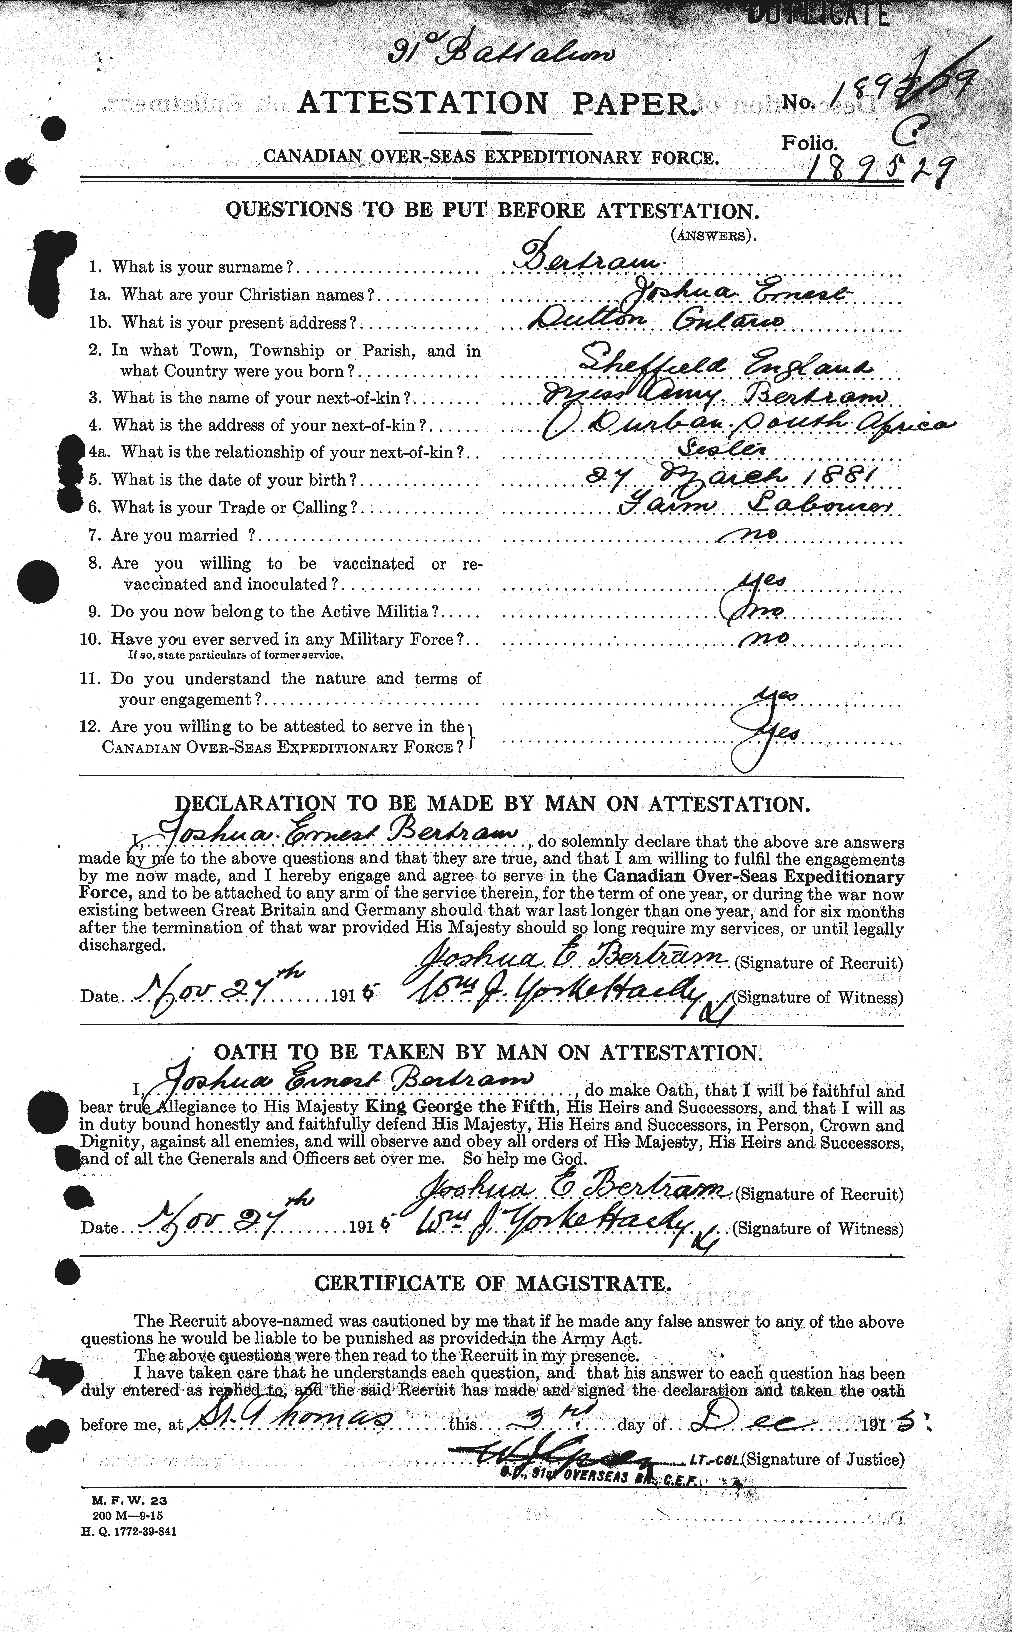 Personnel Records of the First World War - CEF 238683a